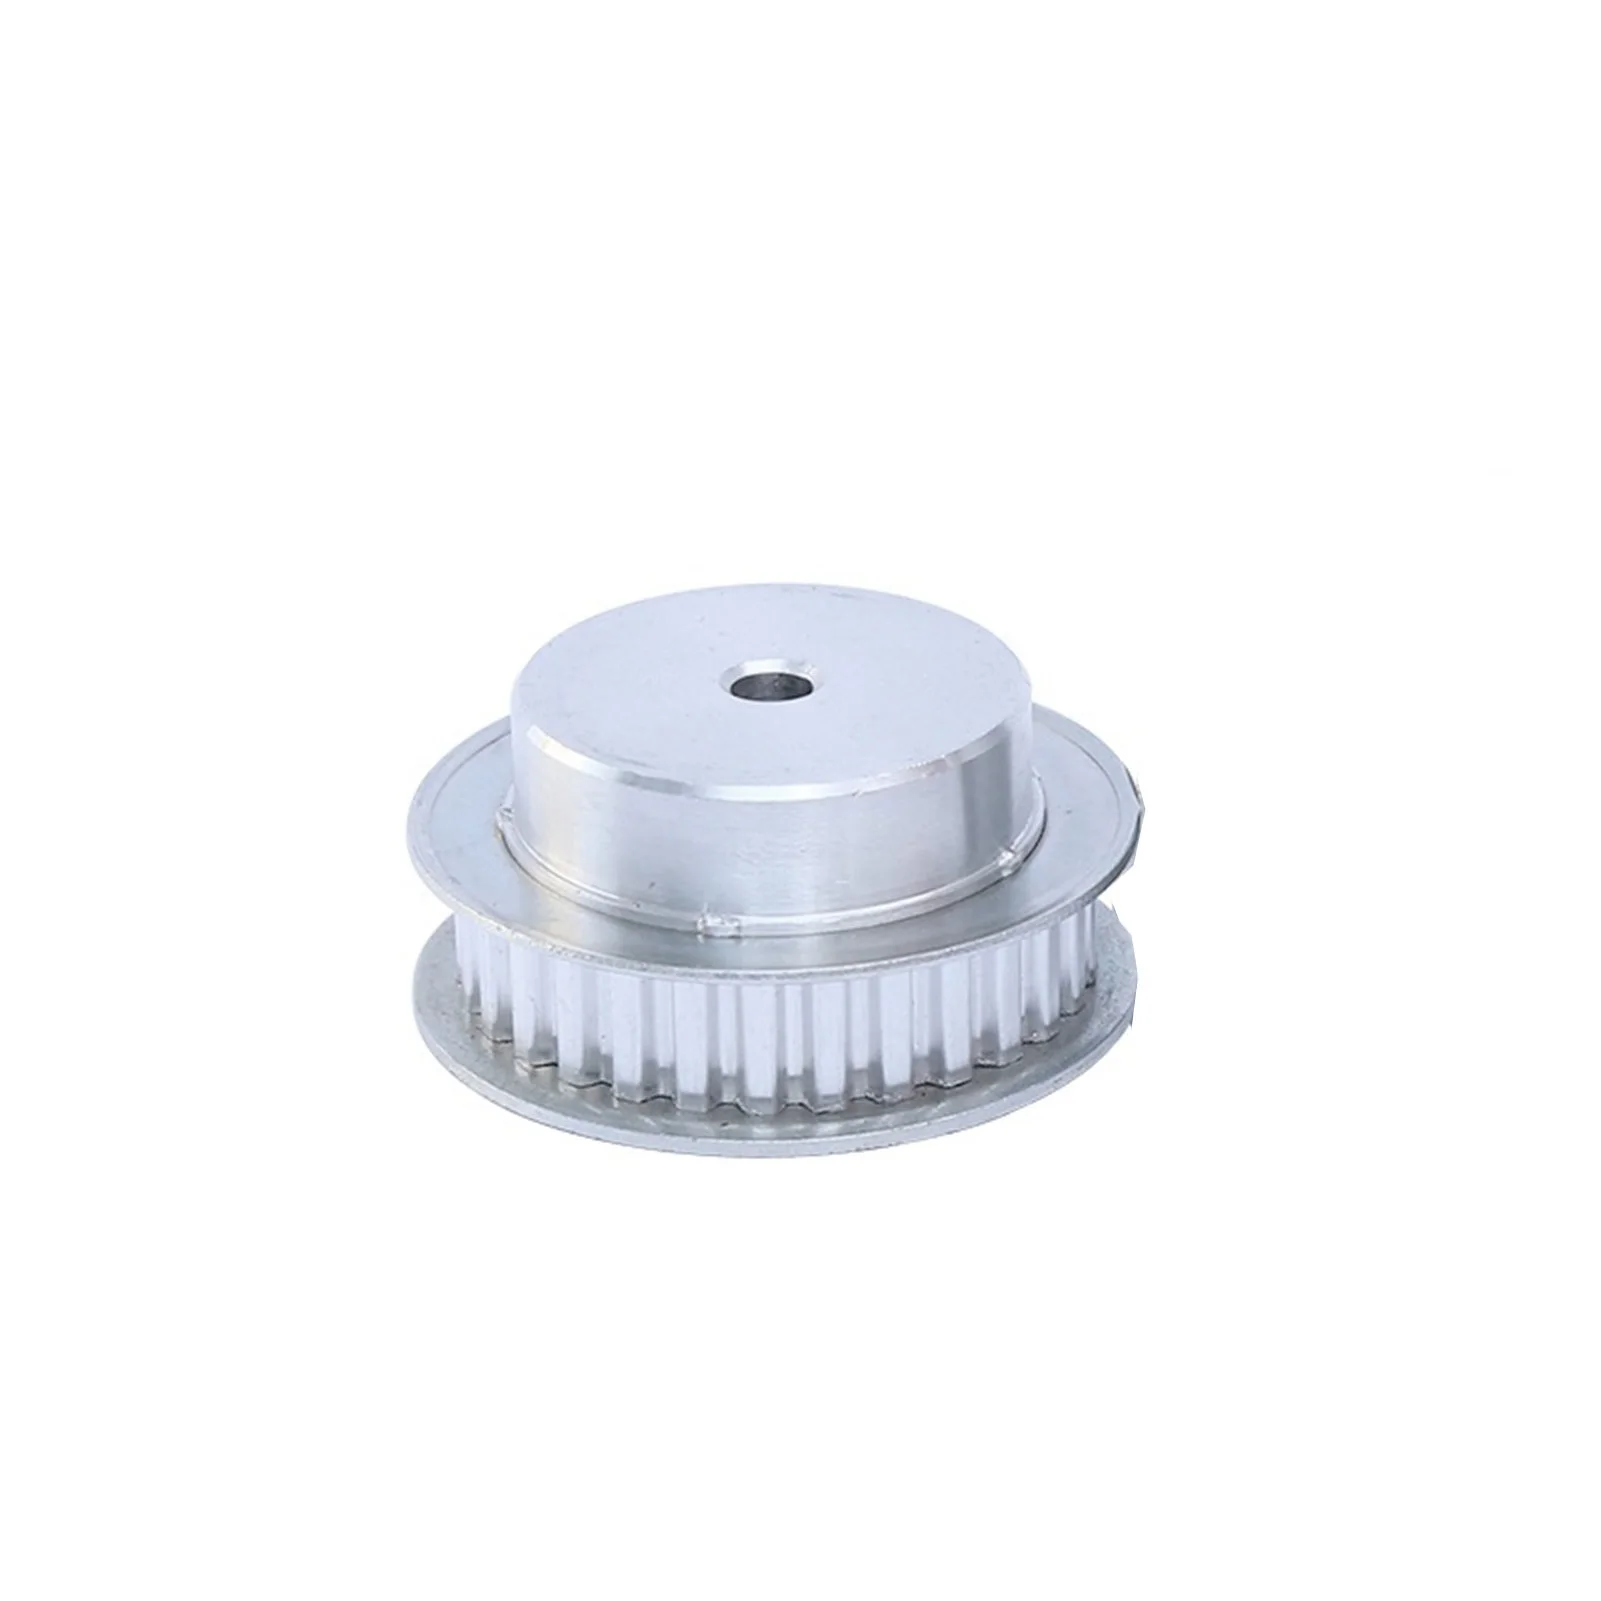 

XL-33T/34T/35T/36T Timing Pulley, Aluminum Material Pulley, Process Hole 8mm, Slot Width 11mm, Match With XL-10mm Timing Belt